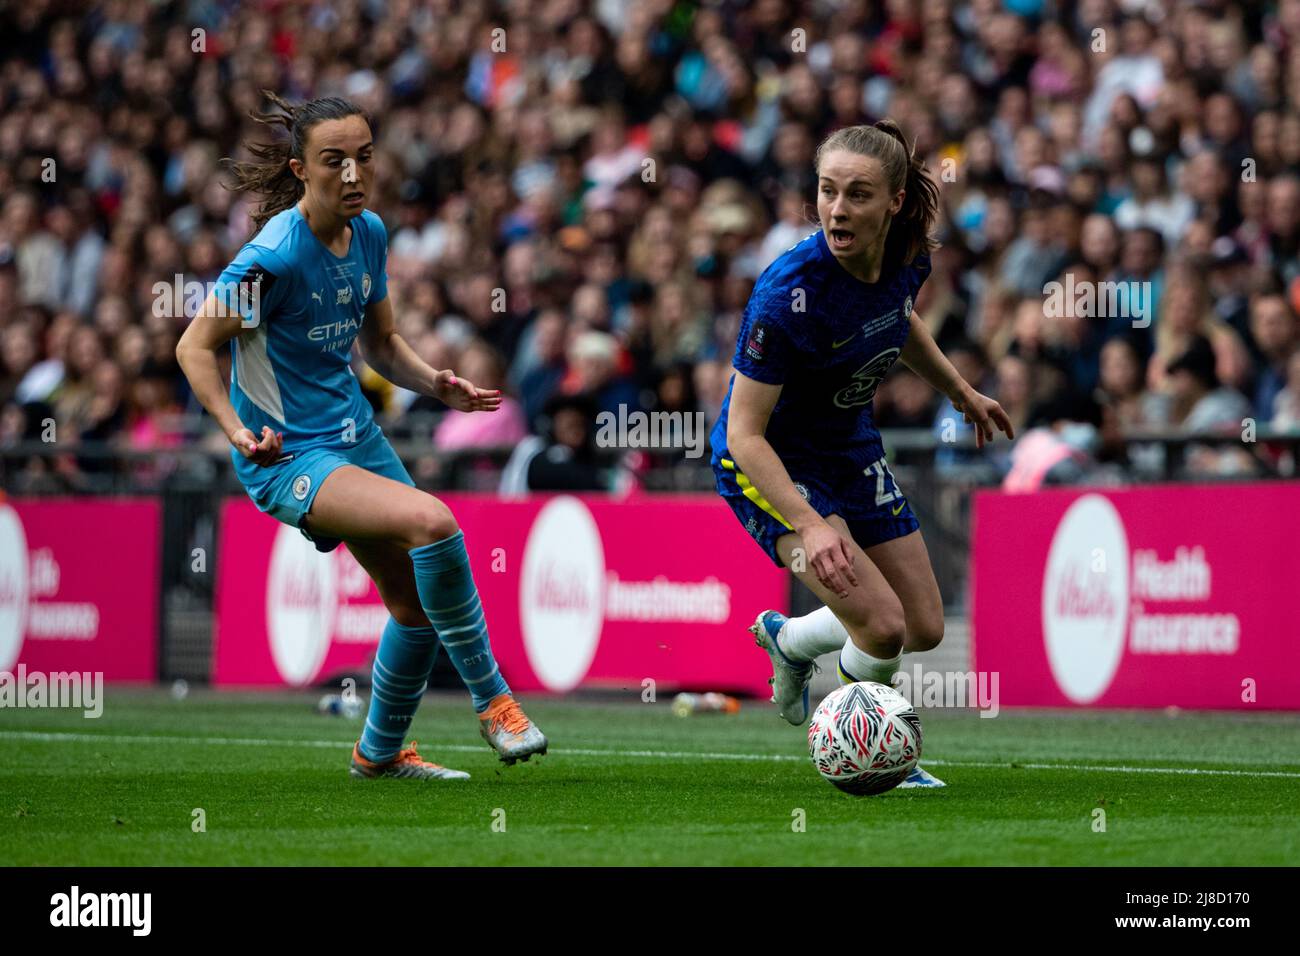 Niamh Charles (21 Chelsea) in action during the Vitality Womens FA Cup Final game between Manchester City and Chelsea at Wembley Stadium in London, England.  Liam Asman/SPP Stock Photo